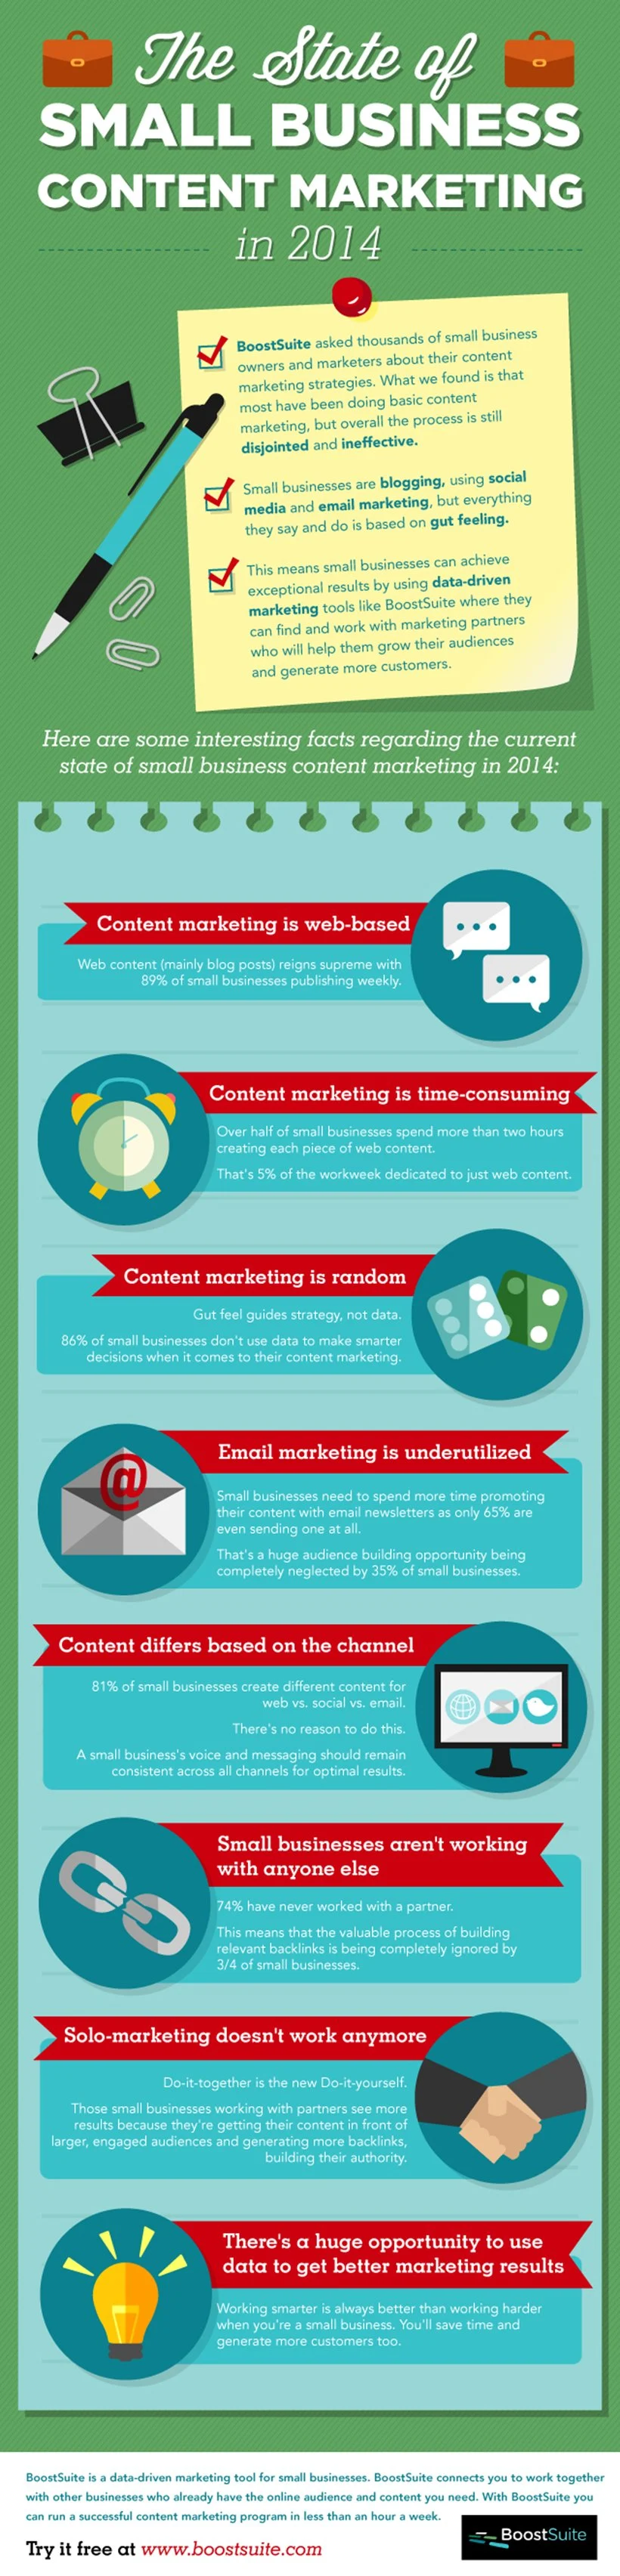 Small business can achieve exceptional results by using data-driven marketing tool that will help them grow their audiences and generate more customers.The State Of Small Business #ContentMarketing in 2014 - #infographic